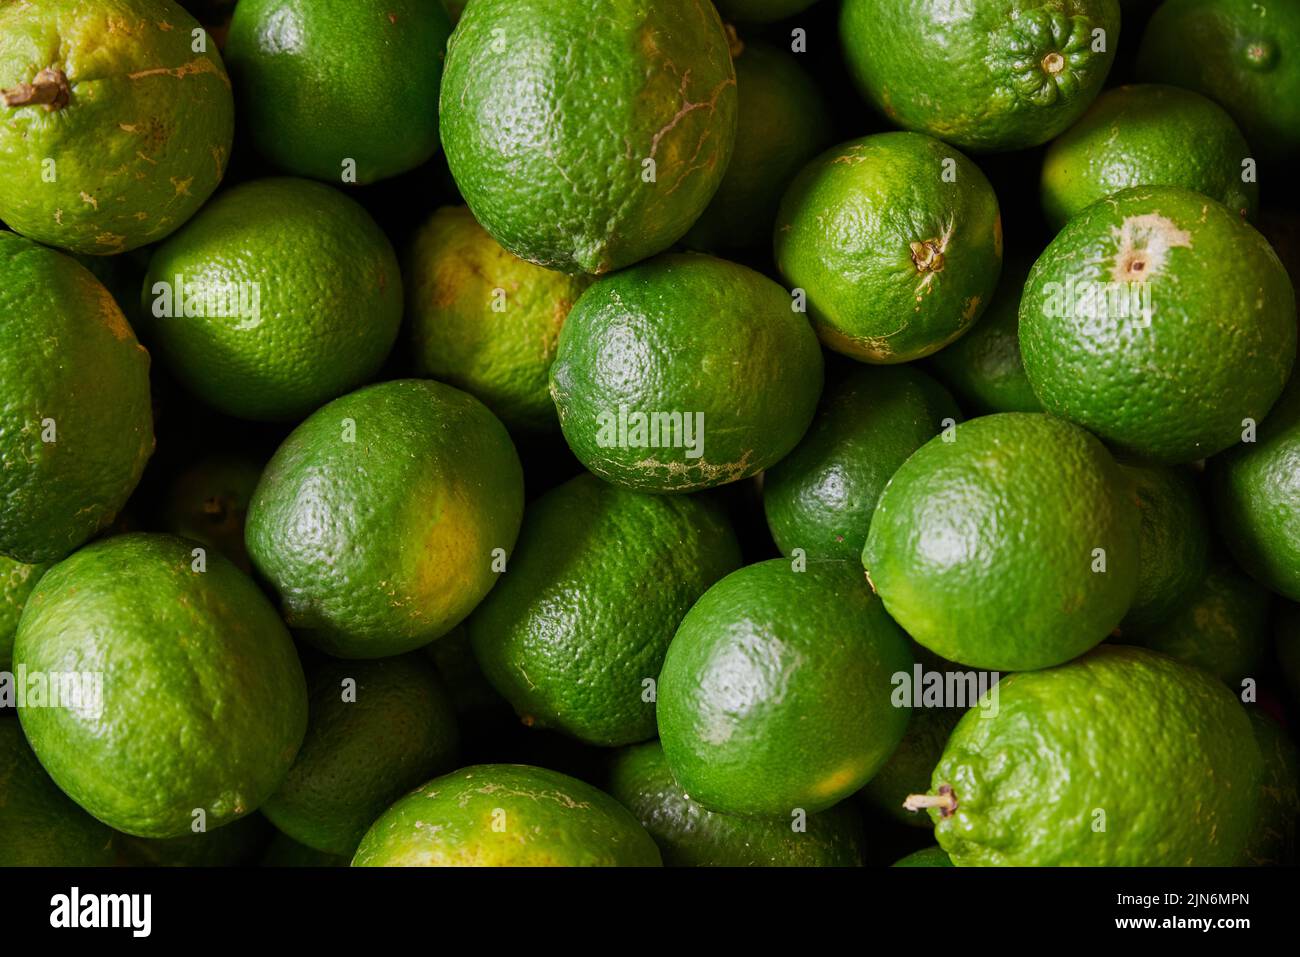 Green lemons placed on a shelf for sale at a market Stock Photo